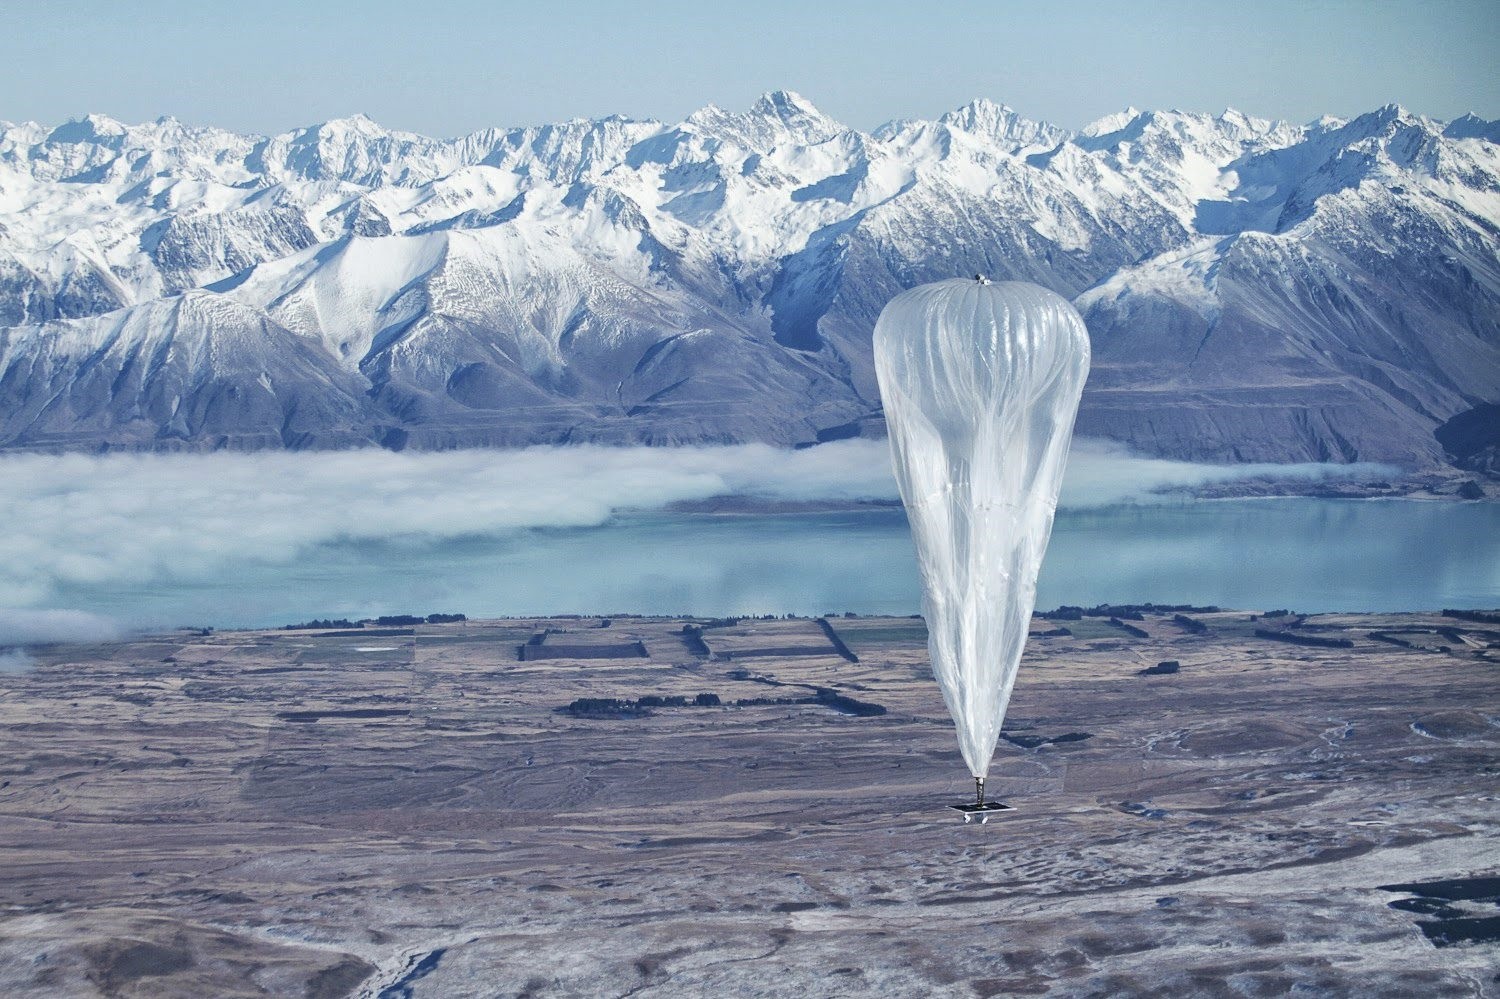 In this June 10, 2013 photo released by Jon Shenk, a Google balloon sails through the air with the Southern Alps mountains in the background, in Tekapo, New Zealand. (AP Photo)